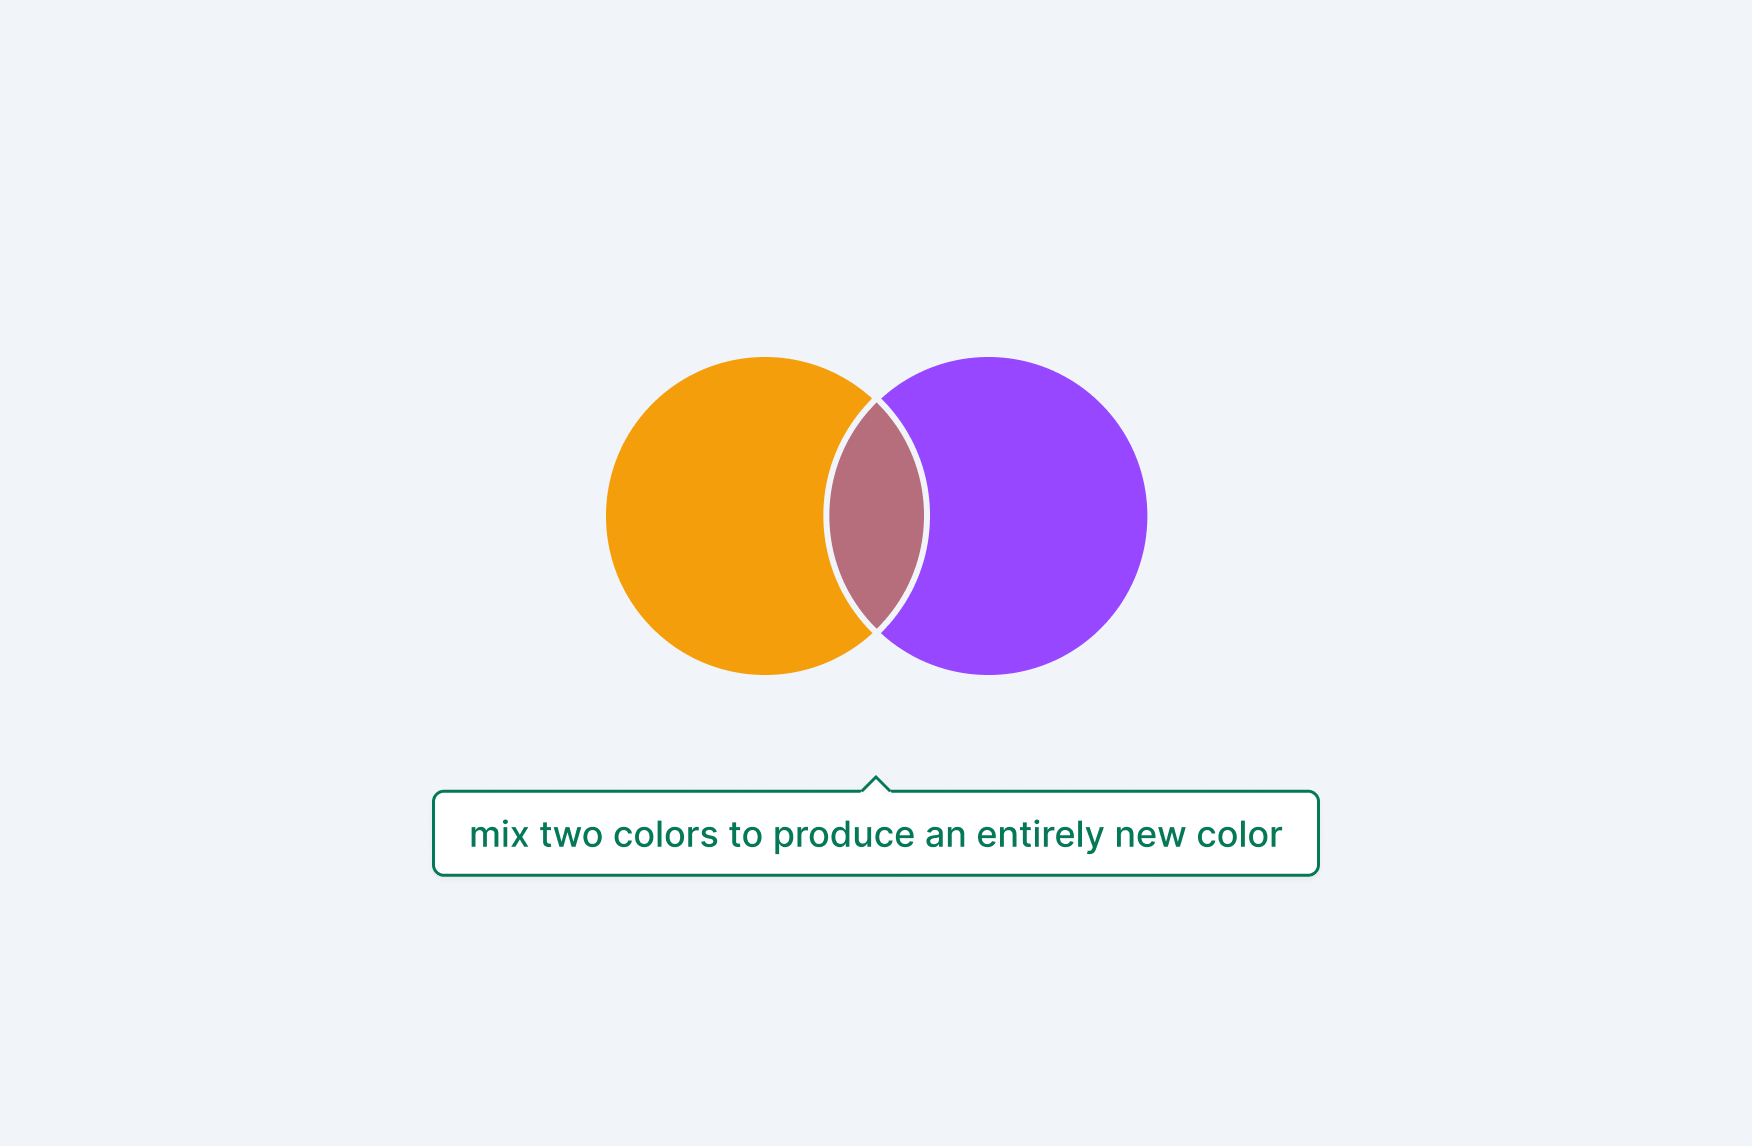 Mix two colors to produce an entirely new color